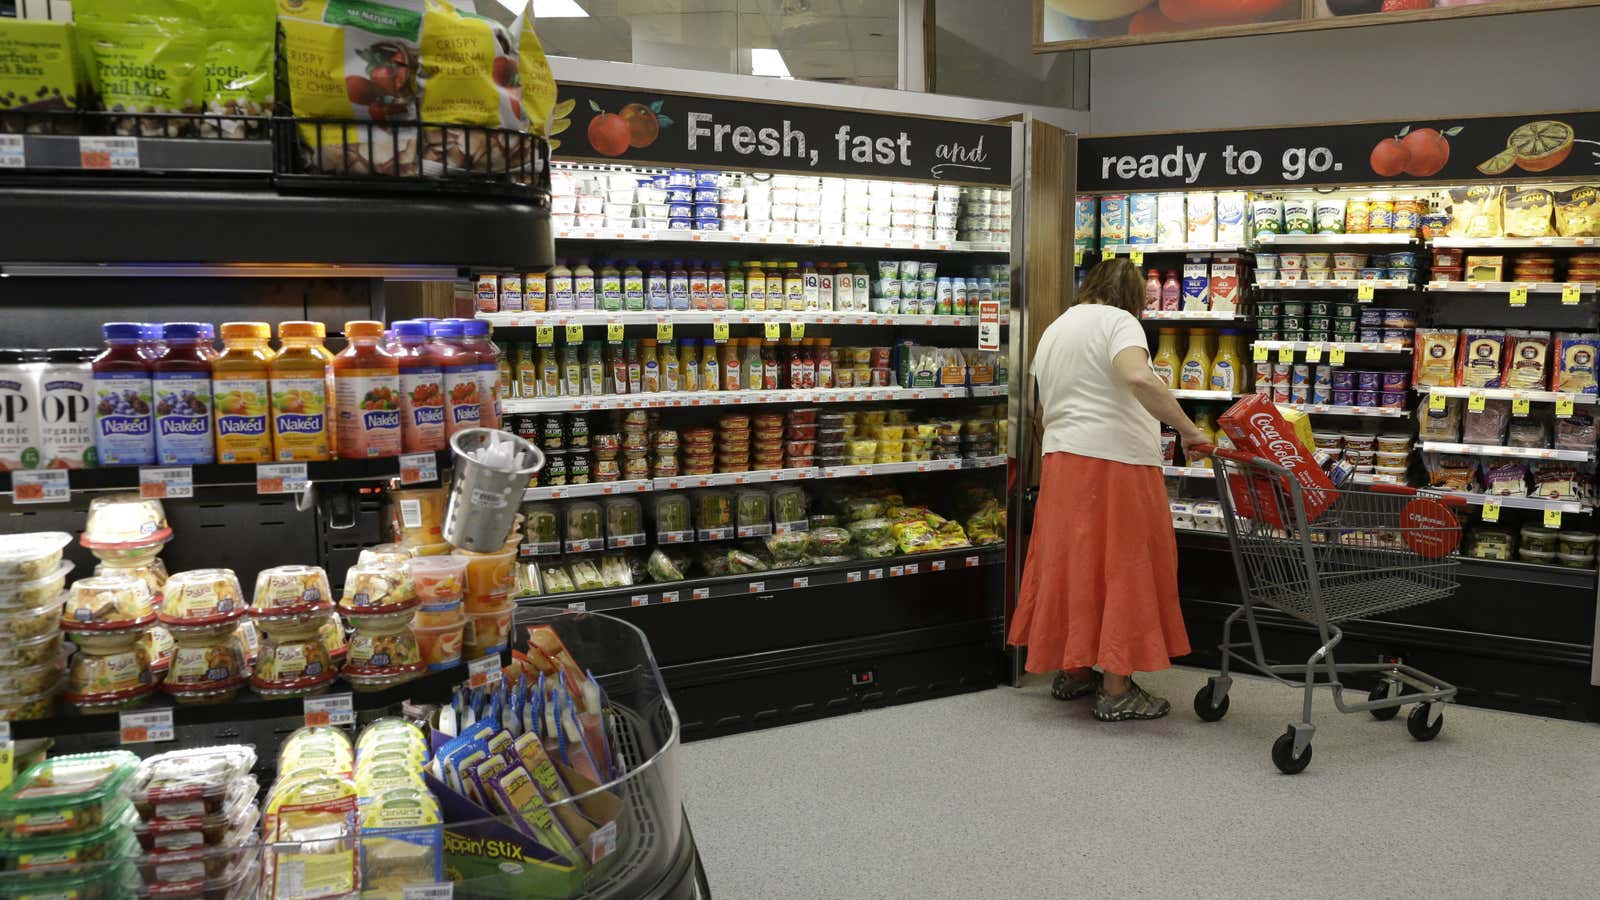 Supermarkets alone will not fix food deserts.